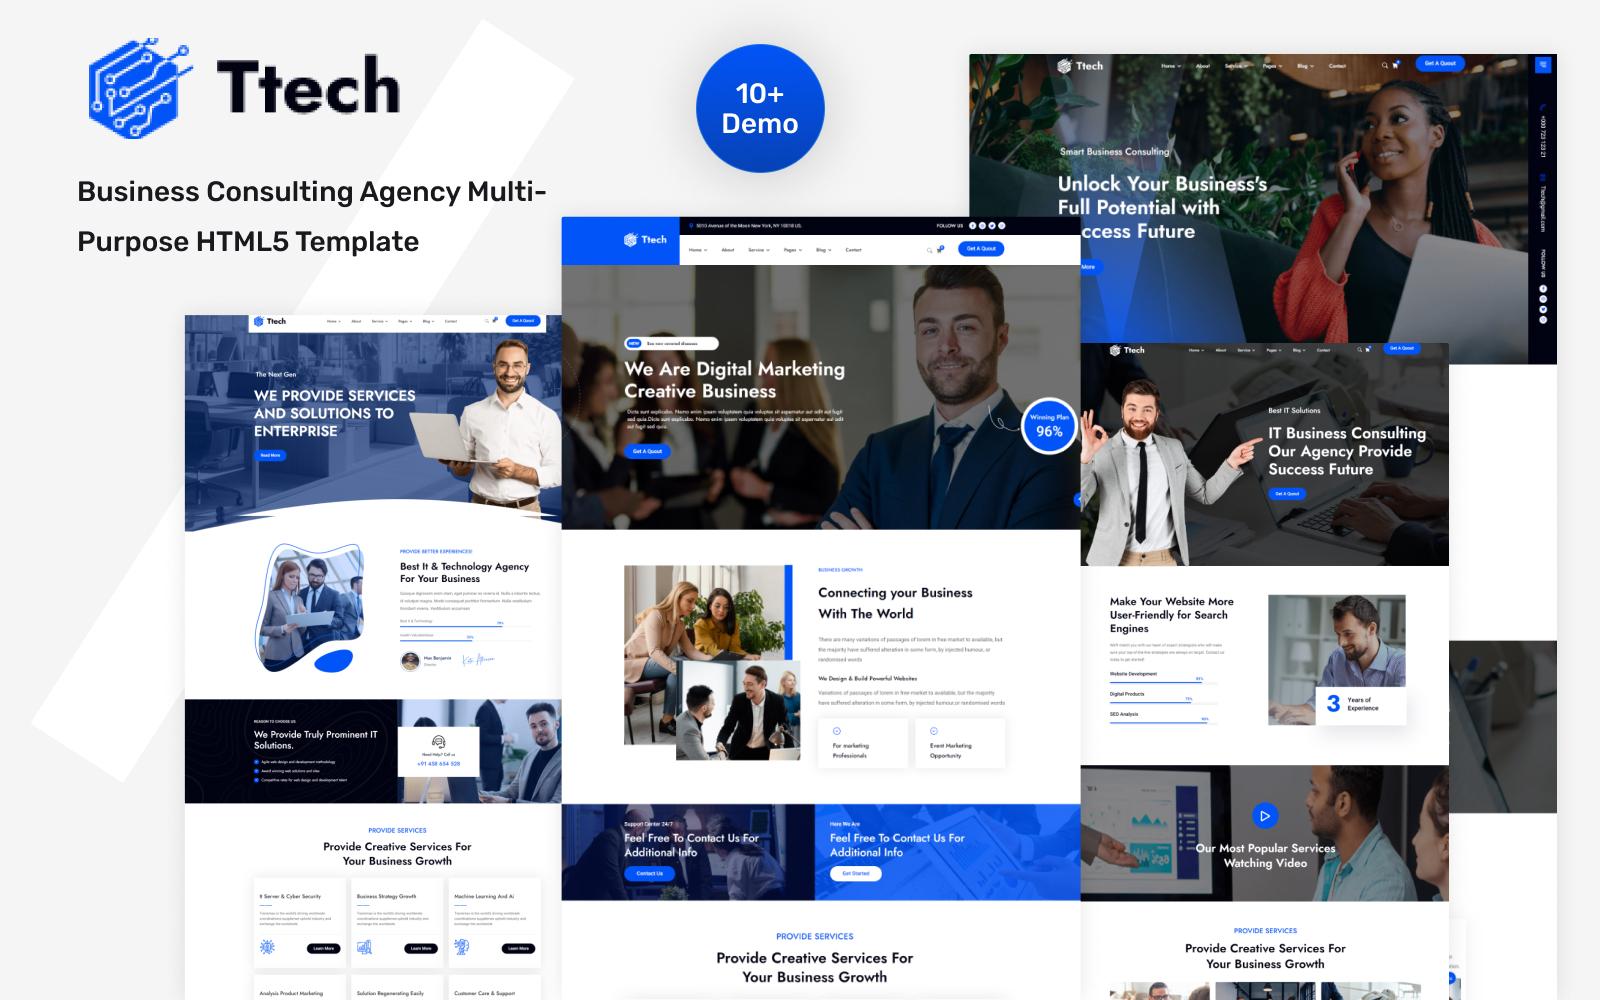 Ttech-Business Consulting Agency Multi-Purpose HTML5 Template Website Template